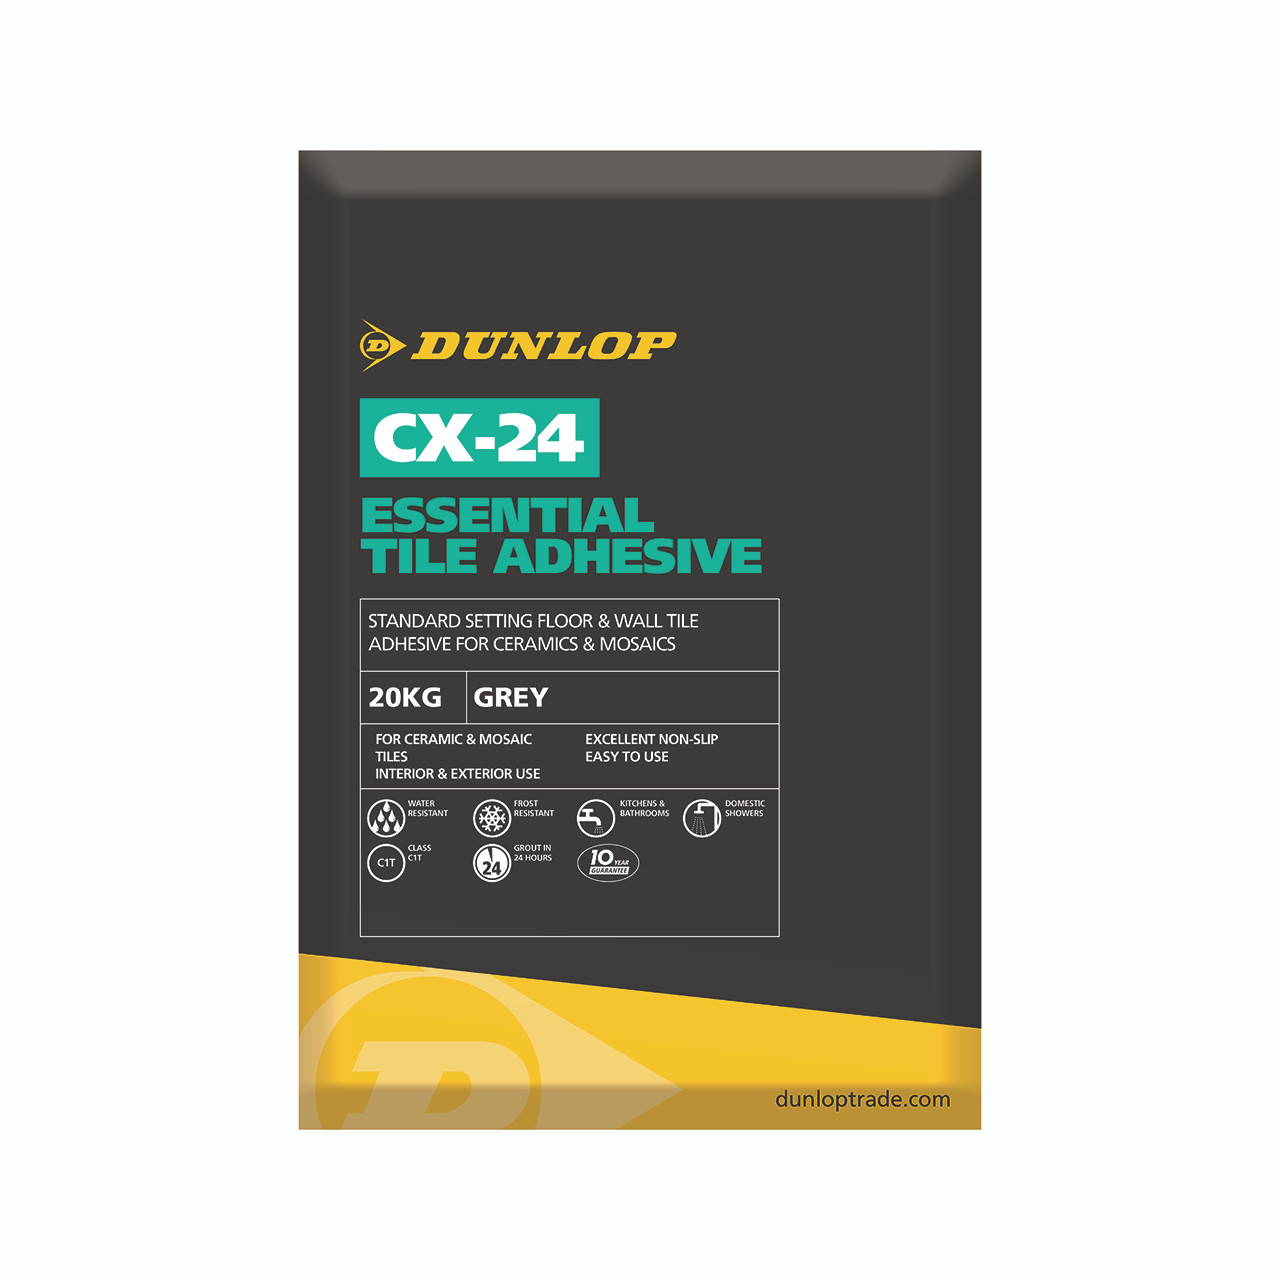 Photograph of Dunlop CX-24 Essential Floor & Wall Tile Adhesive Grey 20kg